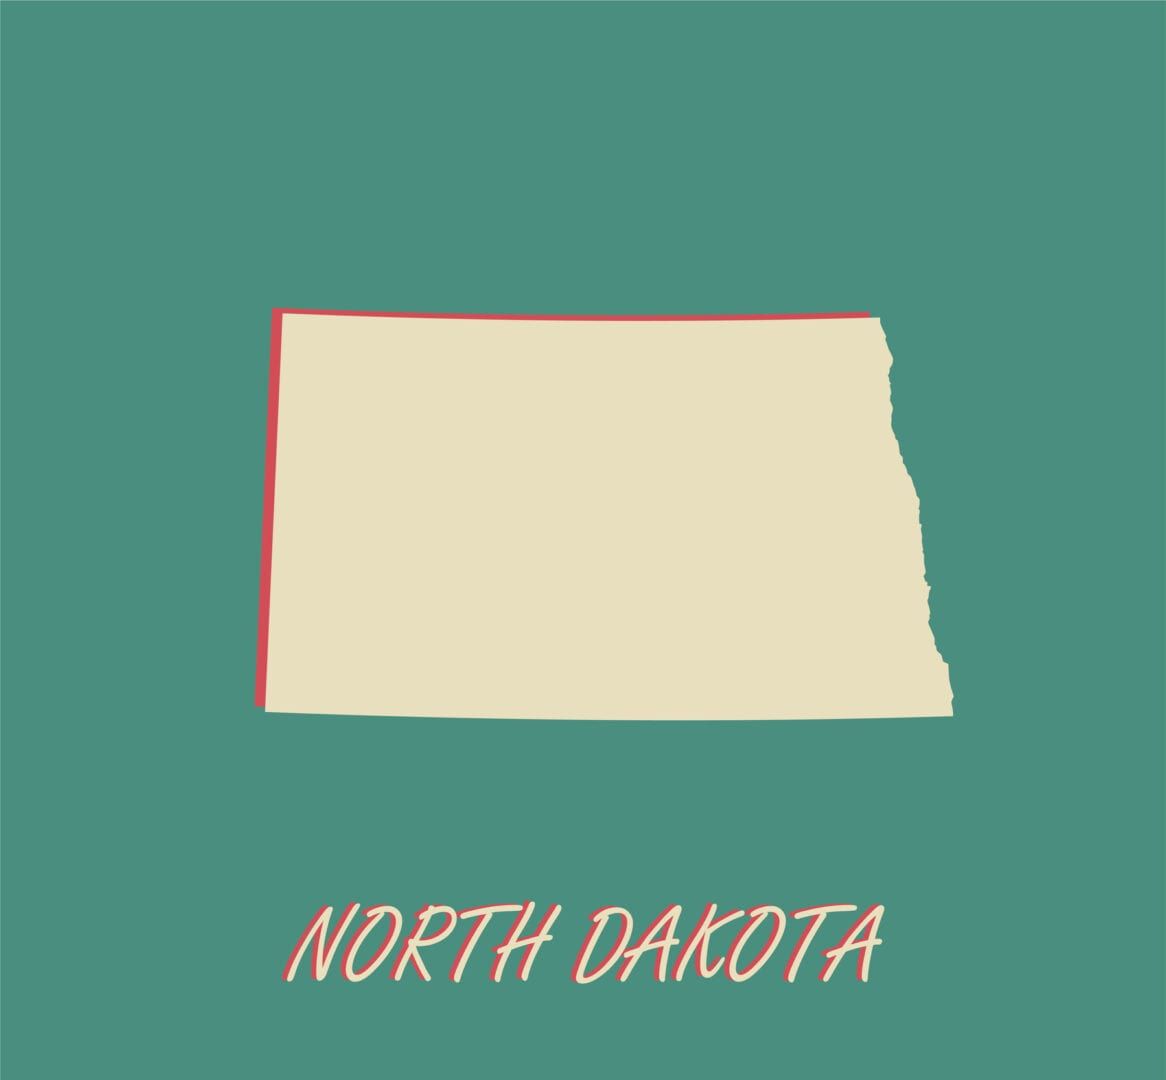 2023 North Dakota household employment tax and labor law guide